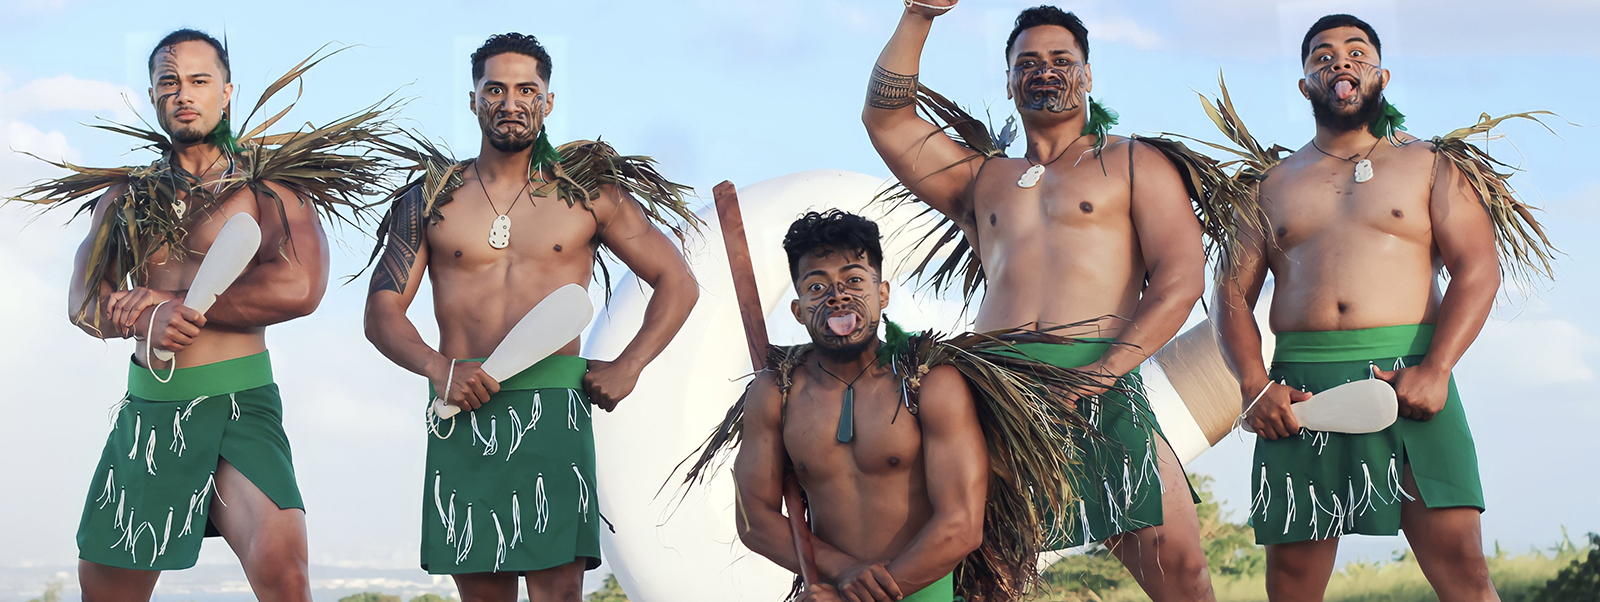 Mauka Warrior Luau cast members pose on stage looking ready for battle.